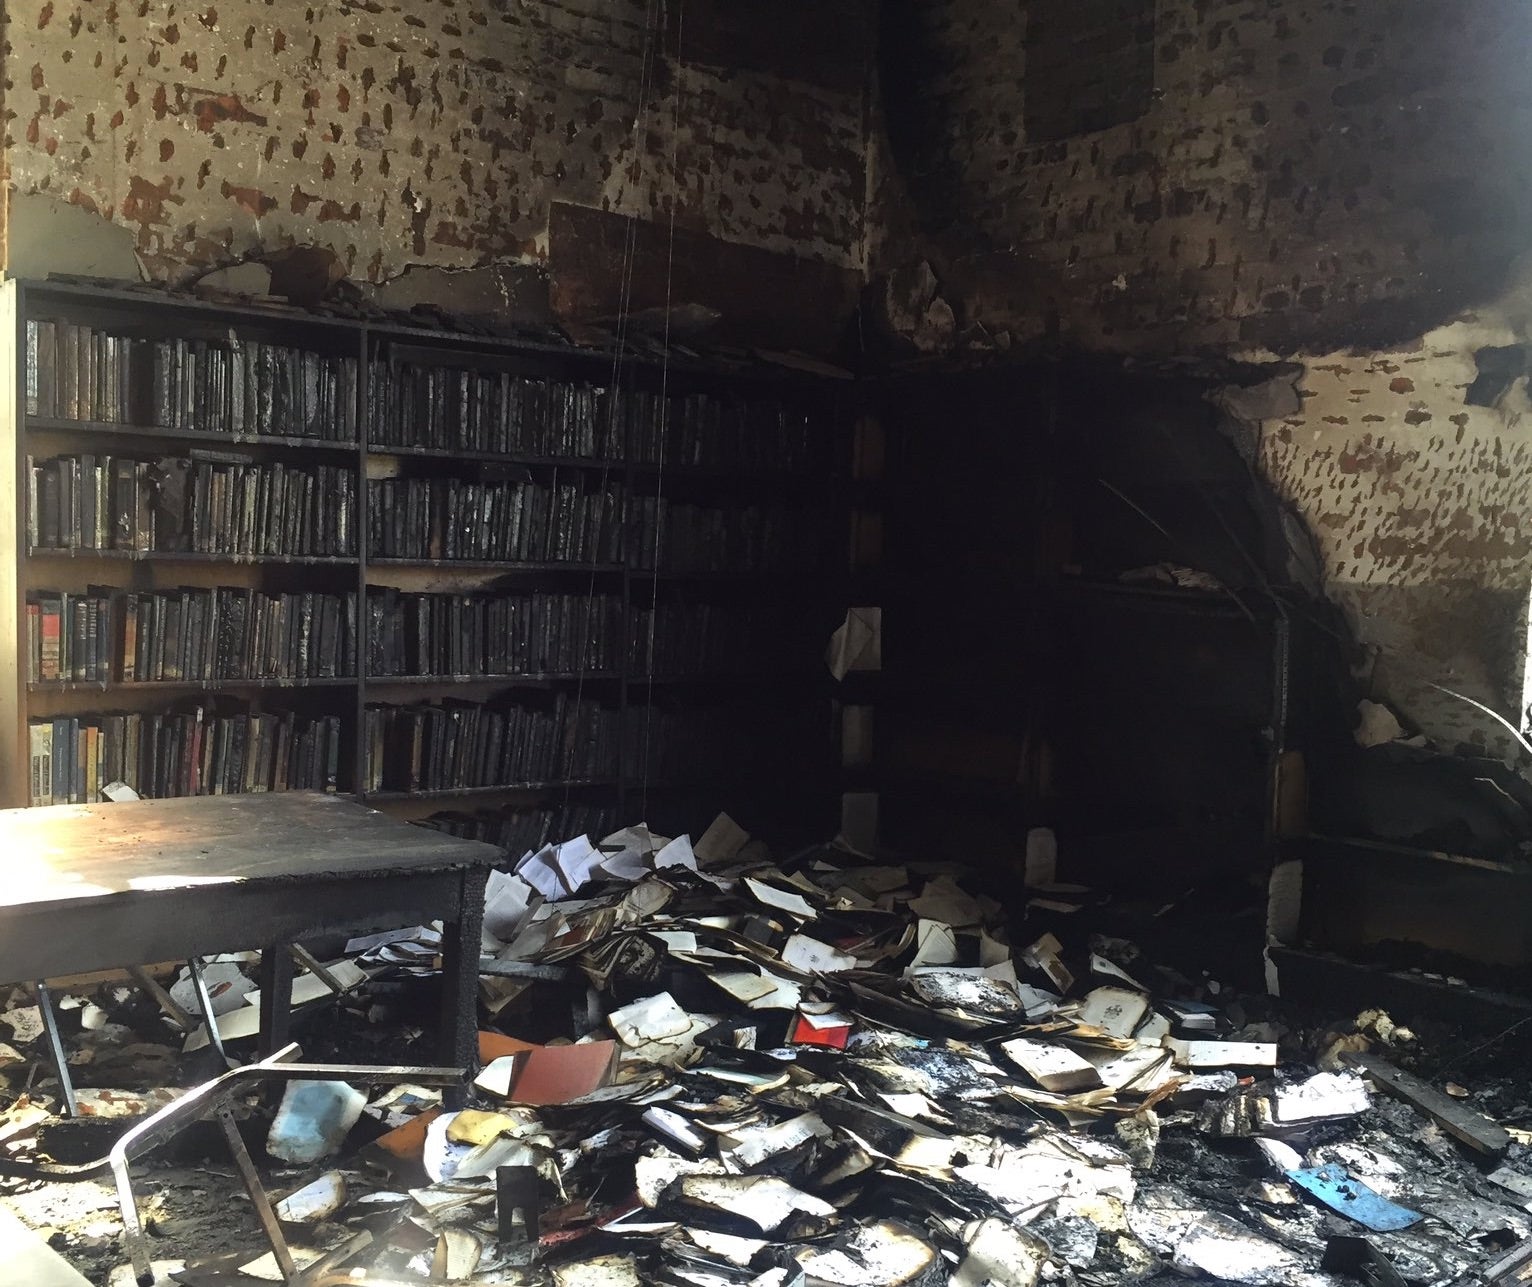 The historic library, which contained many rare volumes, was gutted by fire